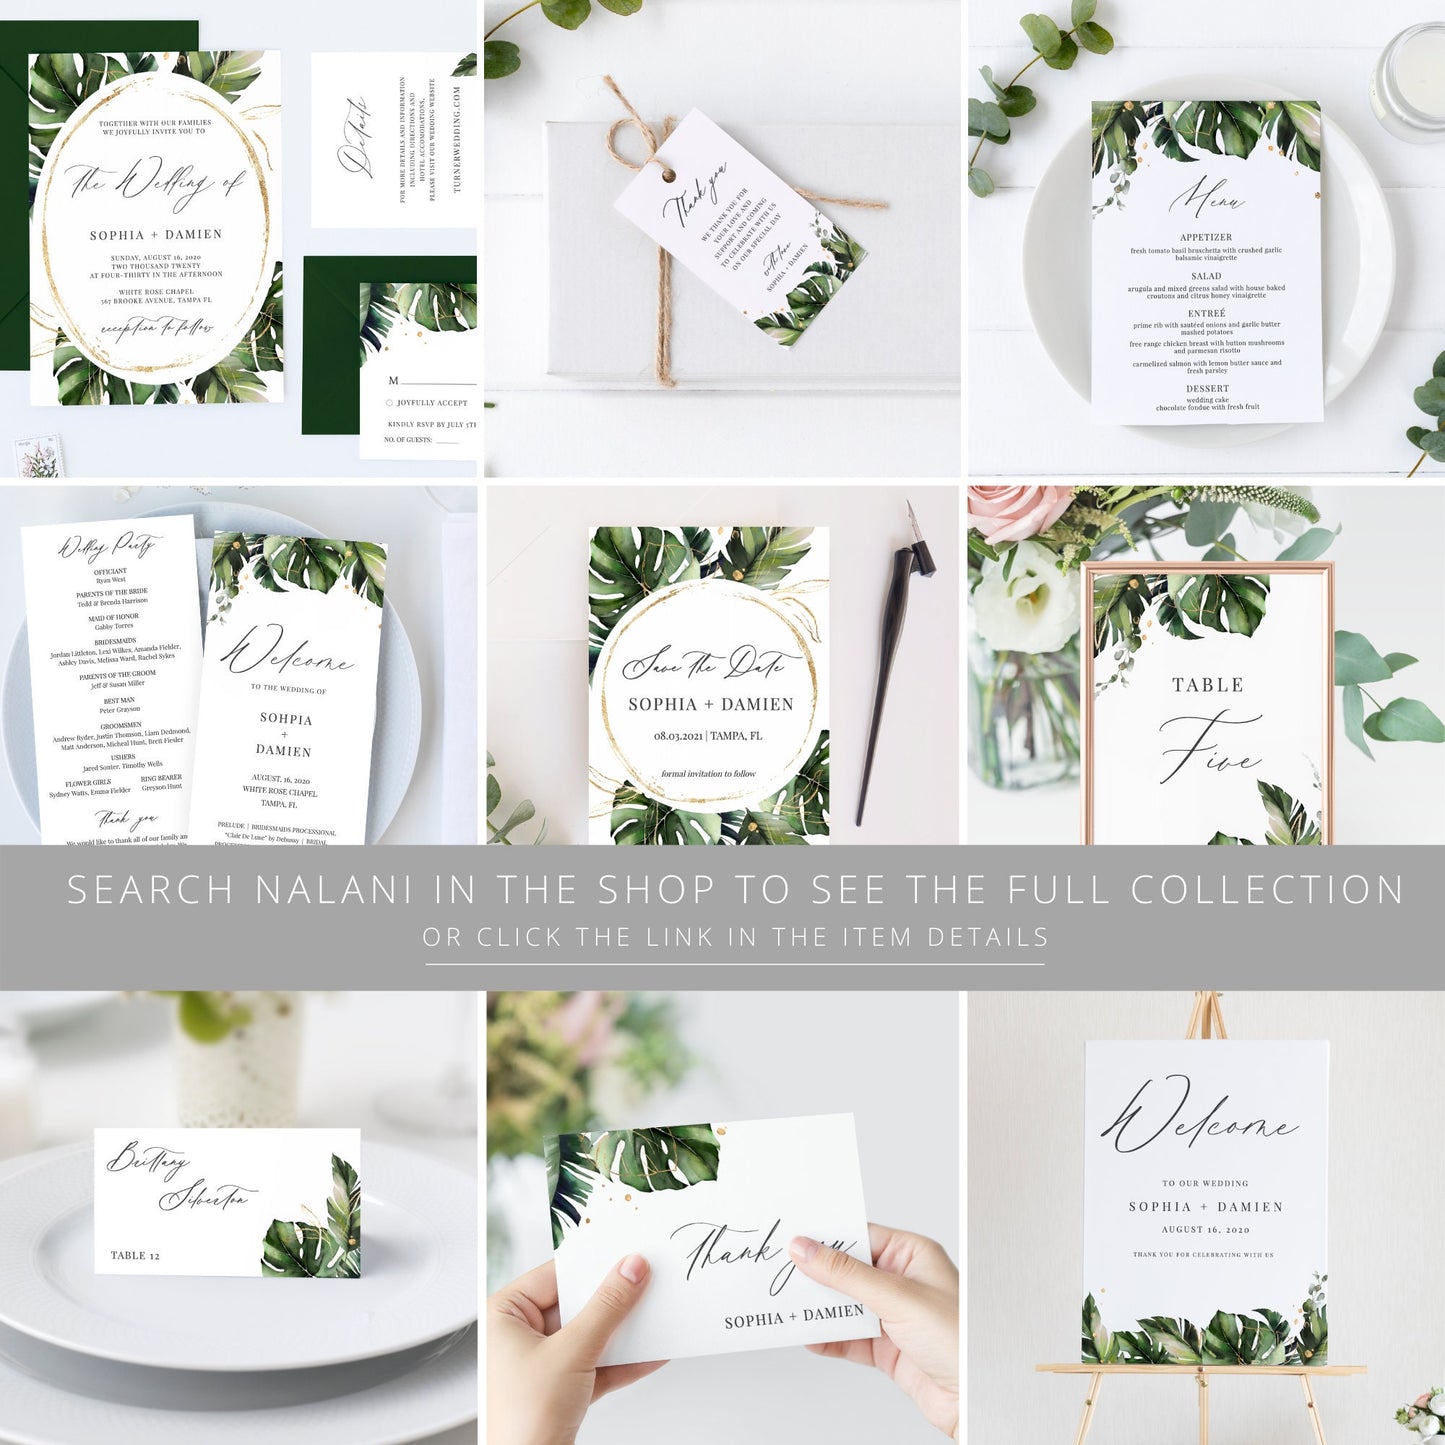 Editable  Save the Date with Photo Tropical Save the Date Cards Beach Wedding Announcement Text Template